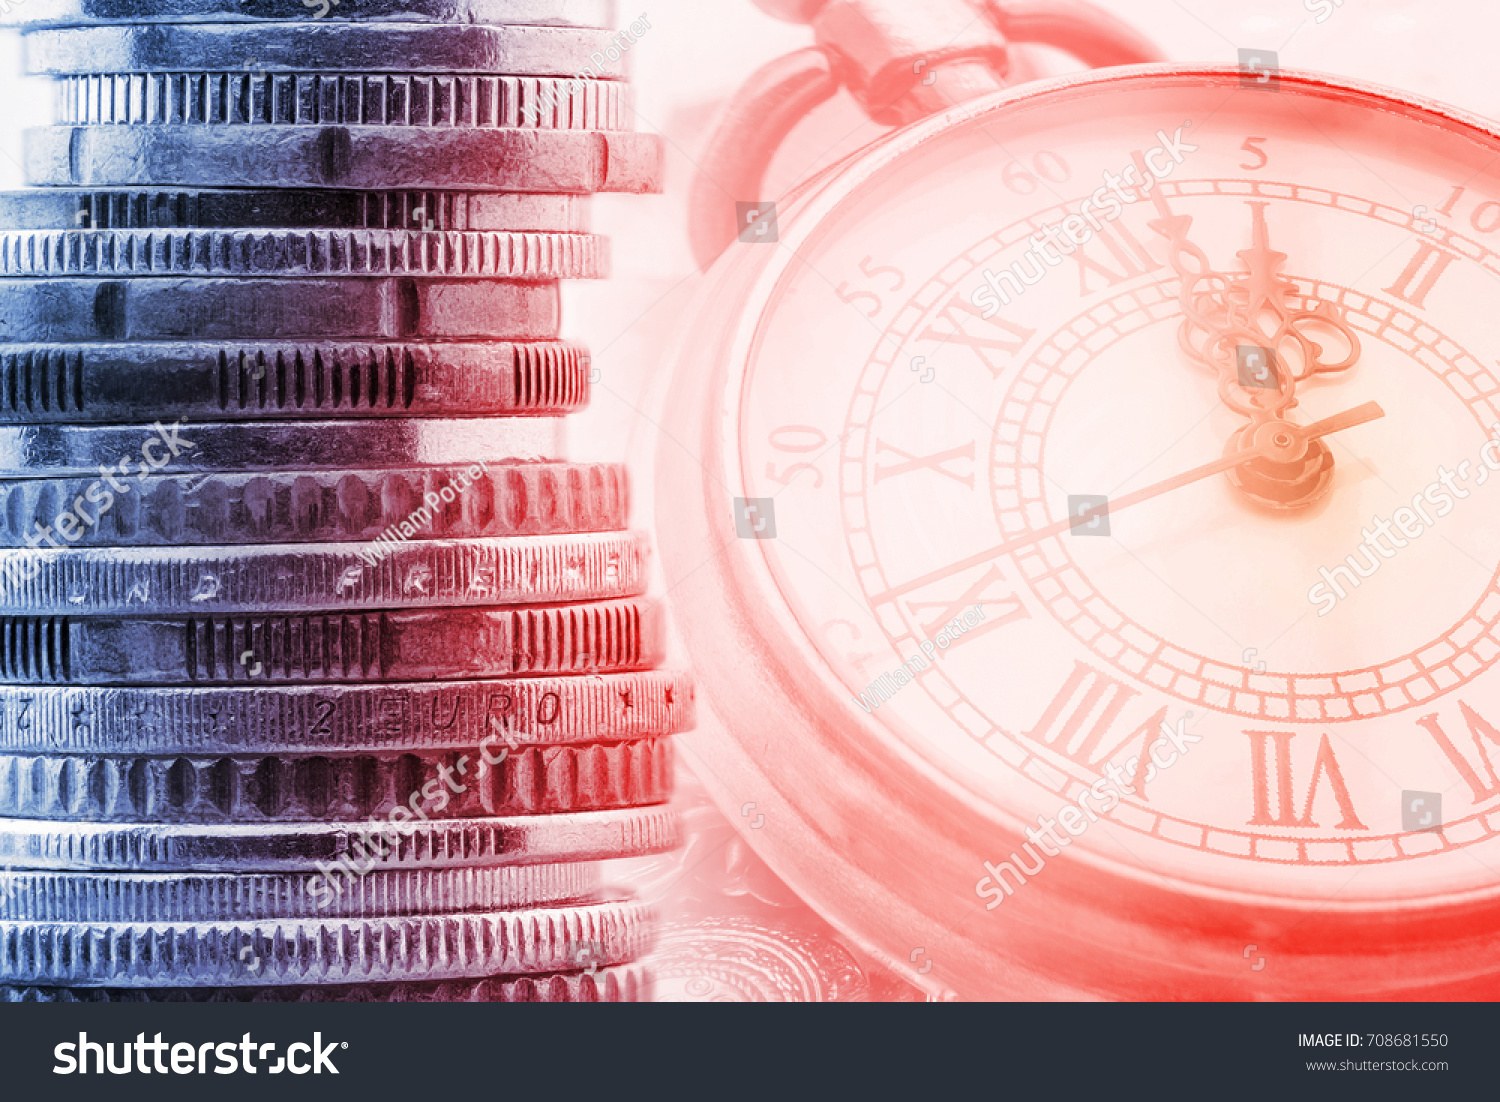 Time is money, time value of money concept : Coins and vintage brass pocket watch, idea of time which is a valuable commodity or resource and it's better to do work or things as quickly as possible. #708681550